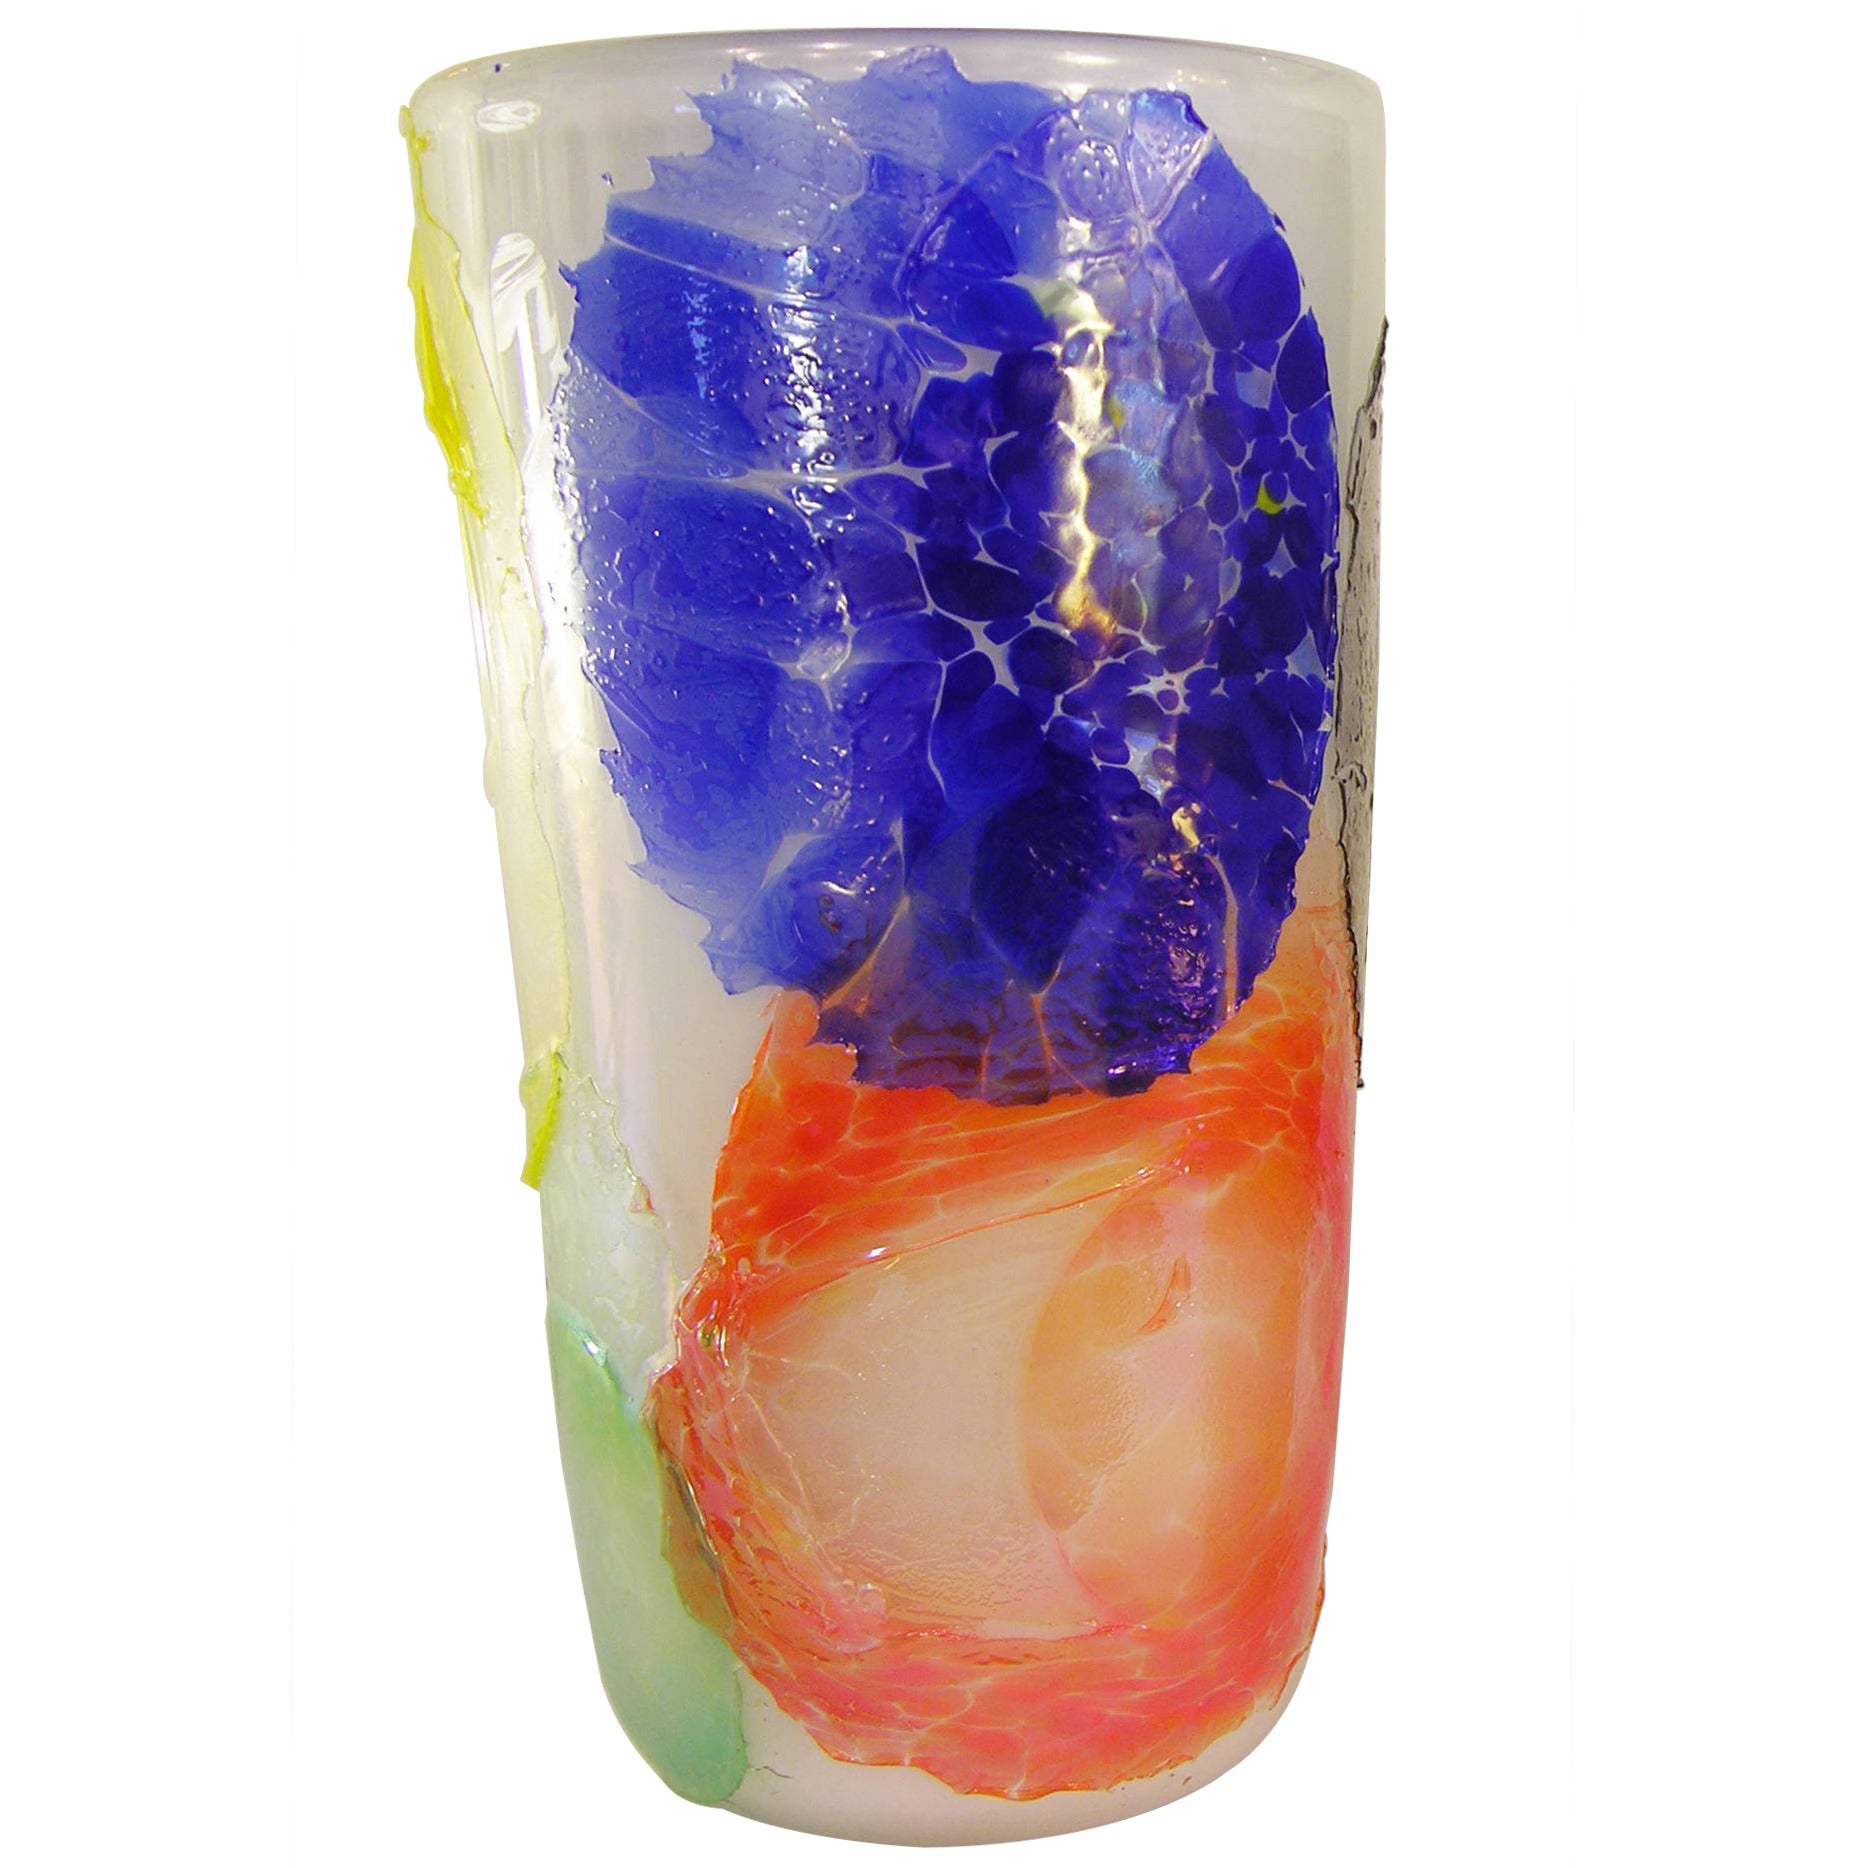 Striking Murano Glass Vase Decorated with Colorful Iridescent Disks